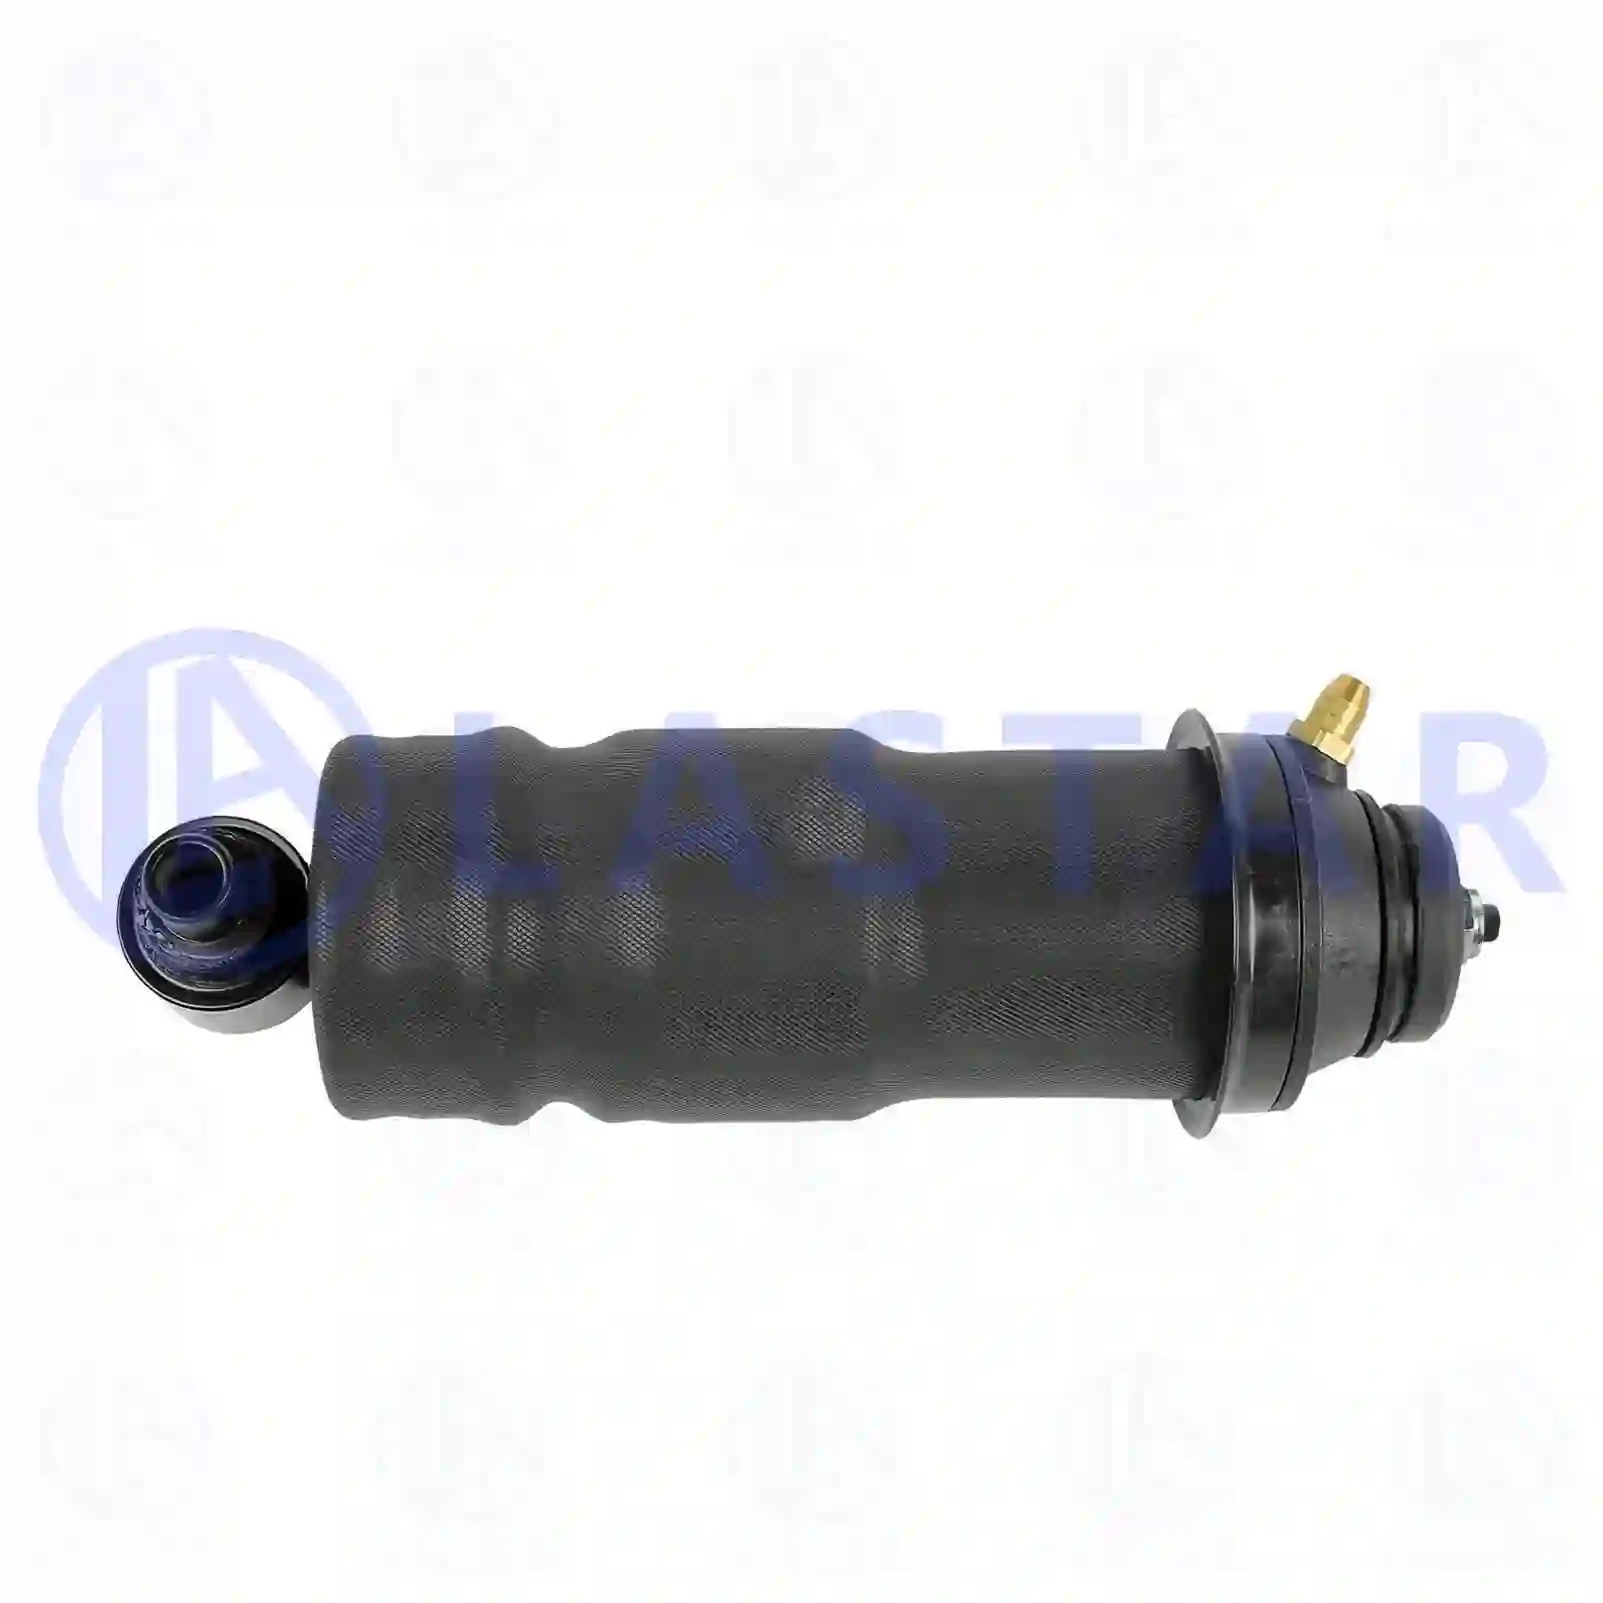 Cabin shock absorber, with air bellow, 77734735, 20453256, 20889132, 21111932, ZG41213-0008, ||  77734735 Lastar Spare Part | Truck Spare Parts, Auotomotive Spare Parts Cabin shock absorber, with air bellow, 77734735, 20453256, 20889132, 21111932, ZG41213-0008, ||  77734735 Lastar Spare Part | Truck Spare Parts, Auotomotive Spare Parts